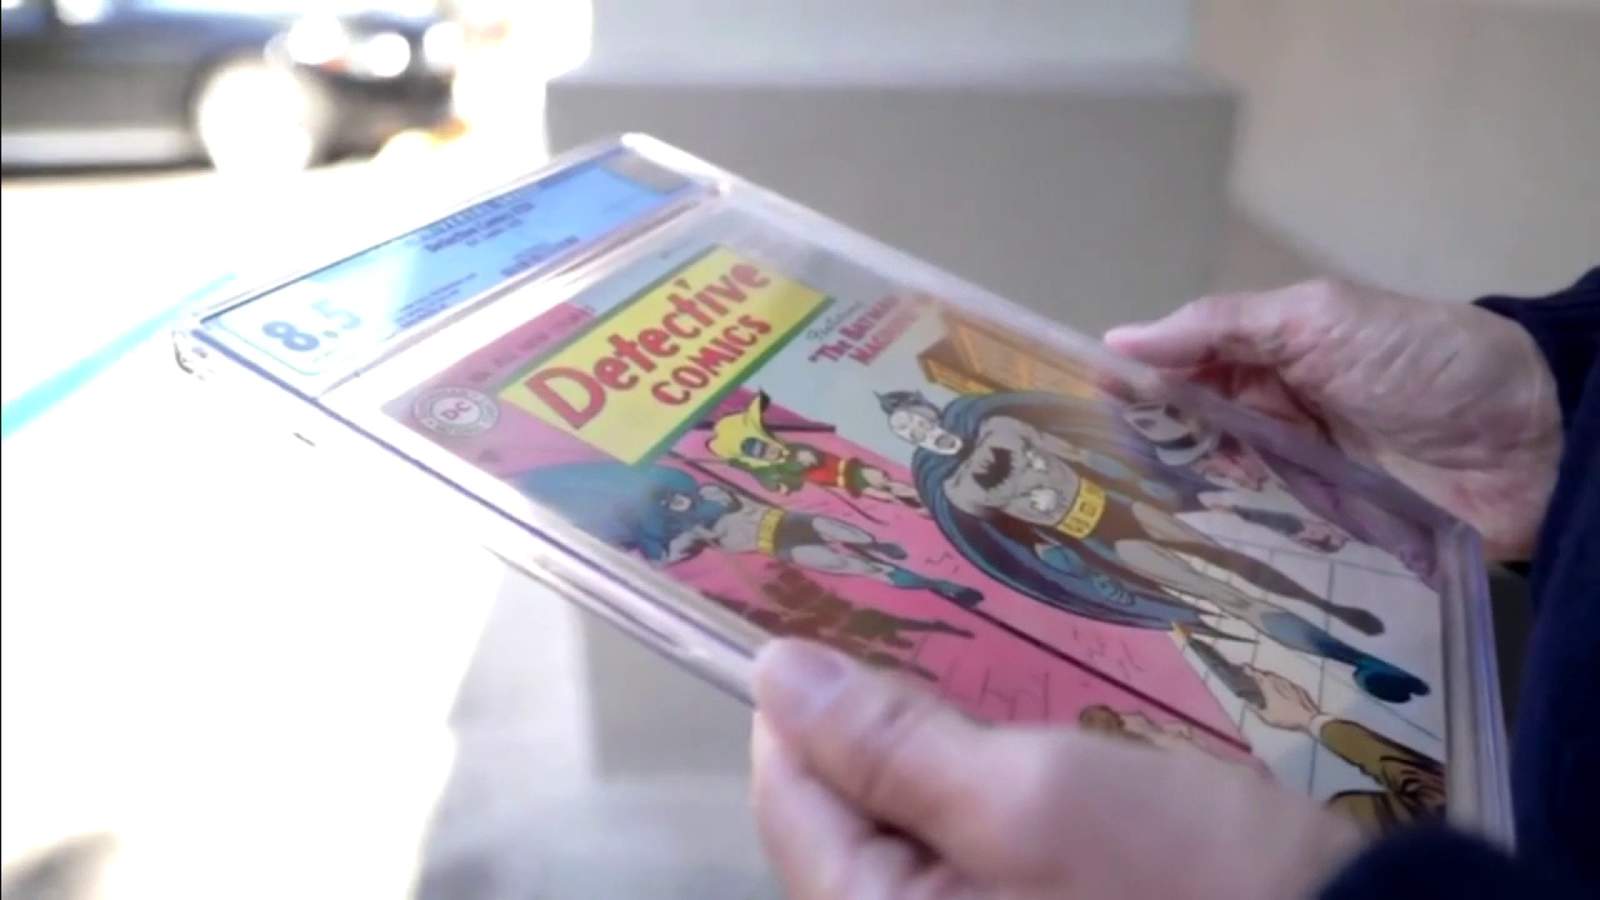 South Florida man auctioning $2 million worth of comics previously stolen from him